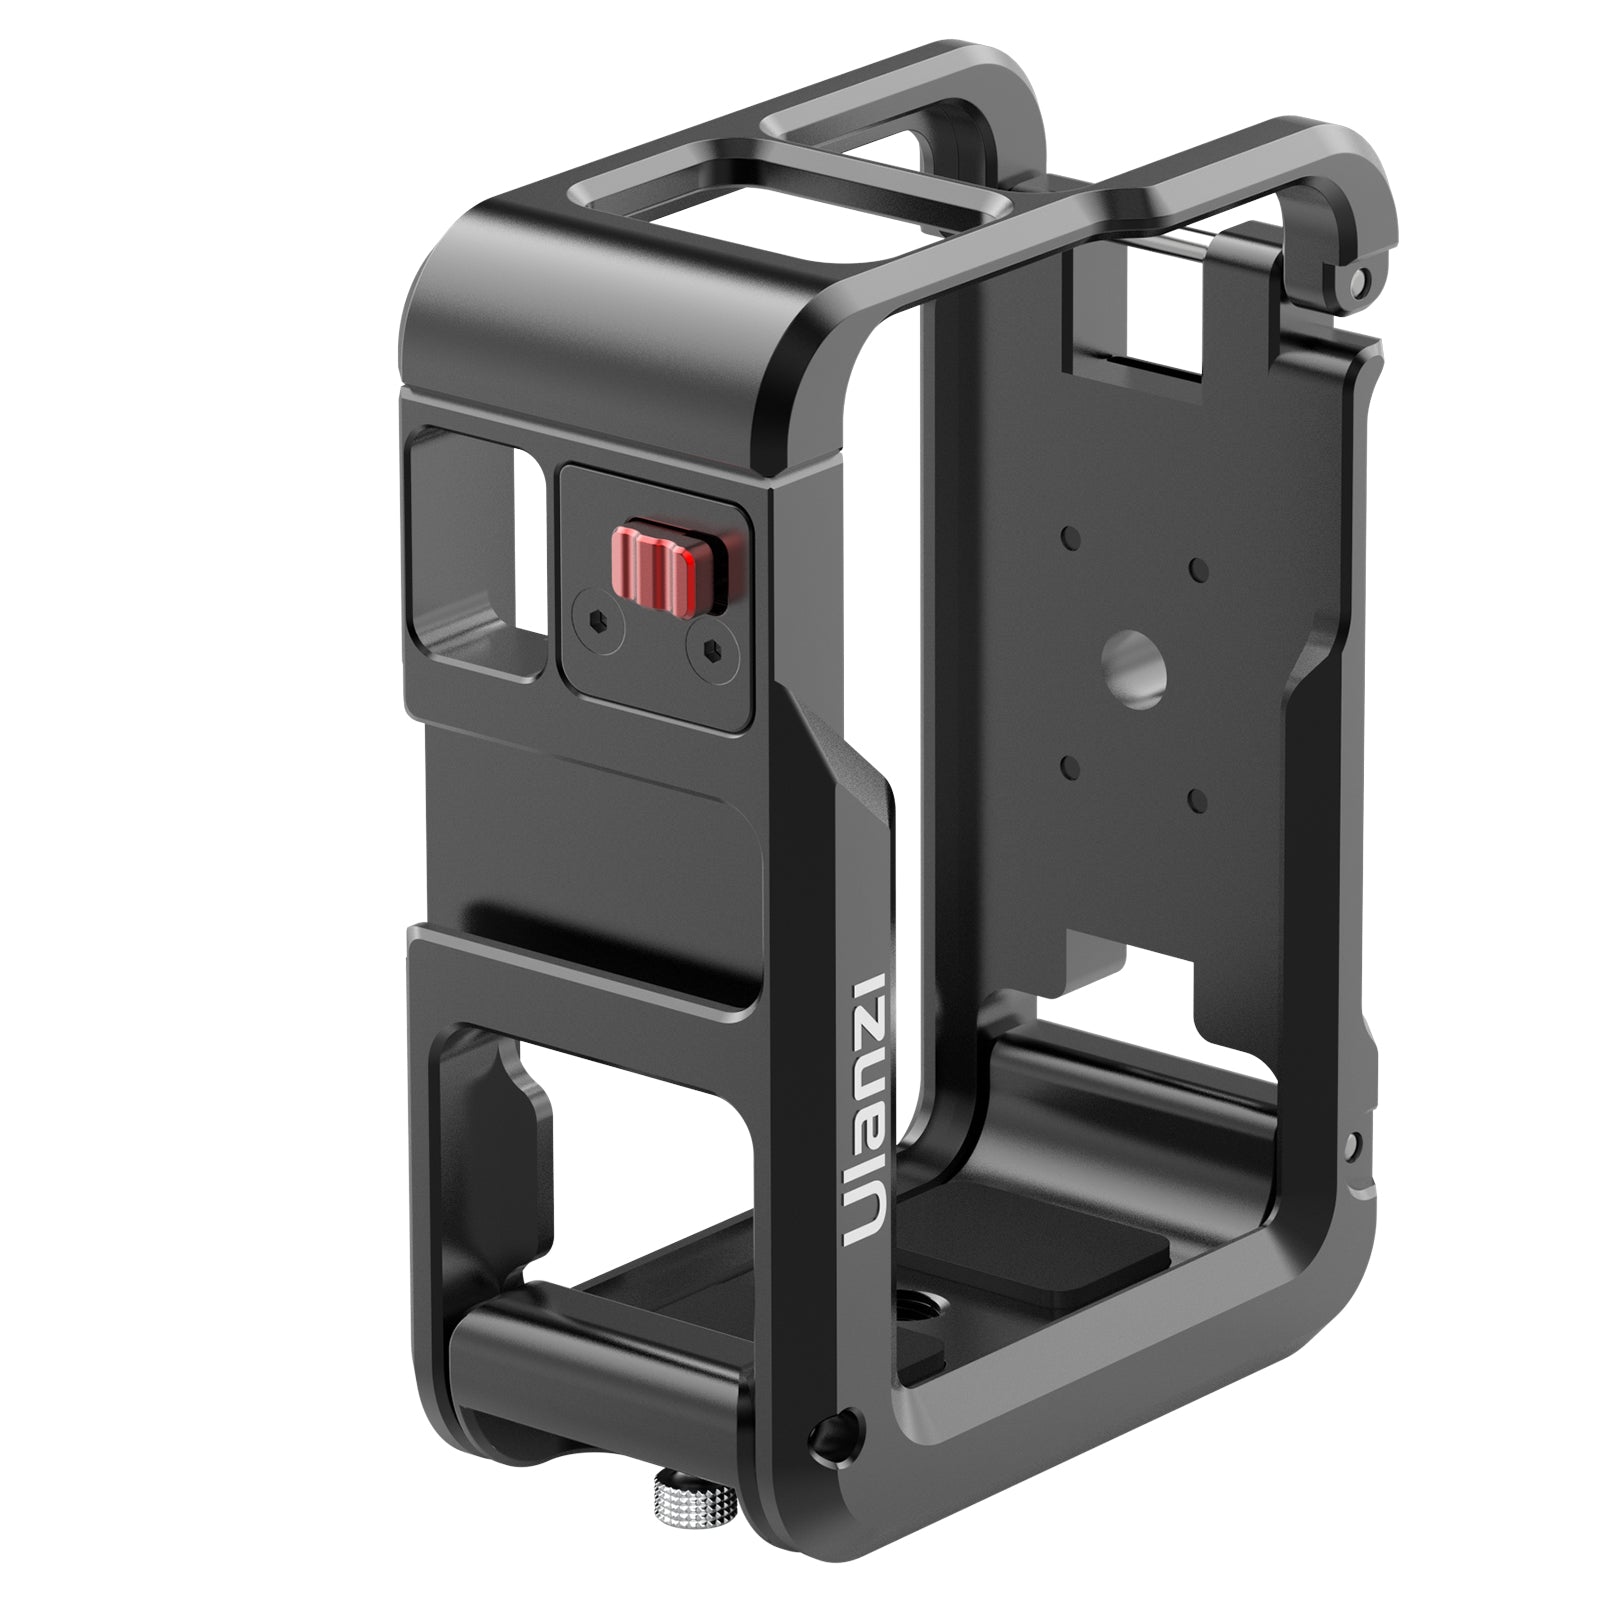 DJI Waterproof Case for Osmo Action 3 & 4